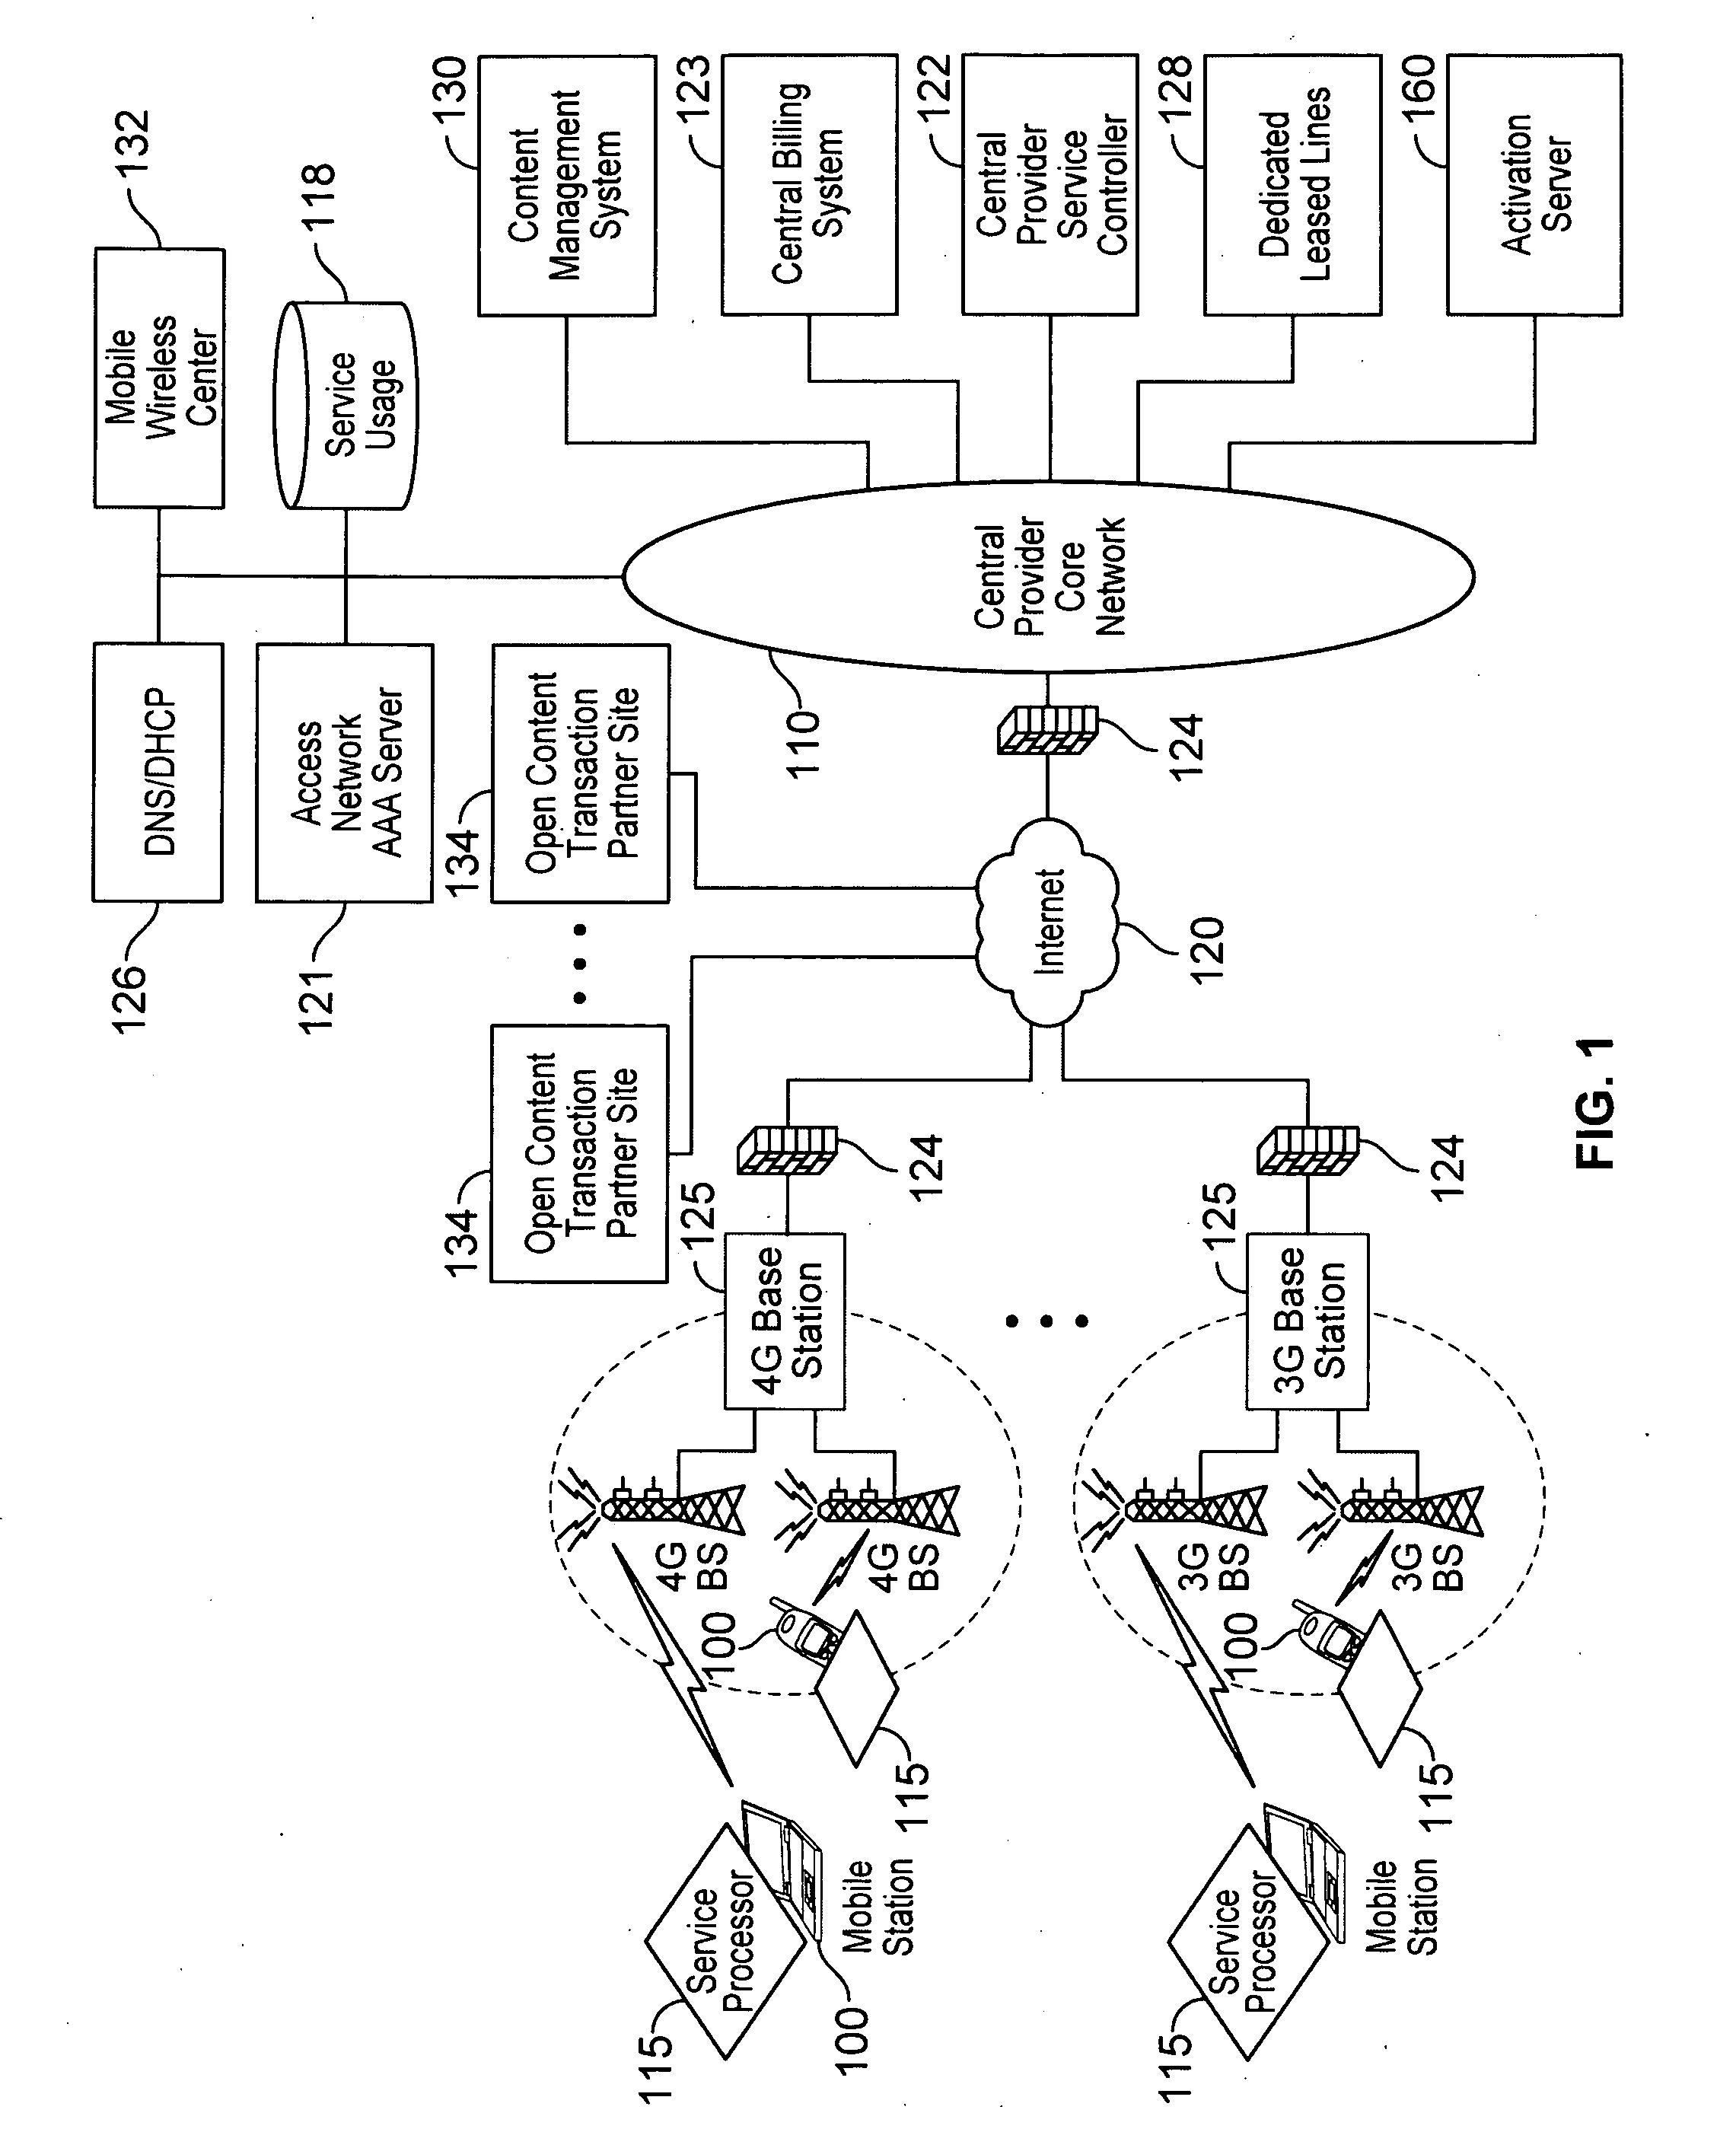 Device assisted ambient services